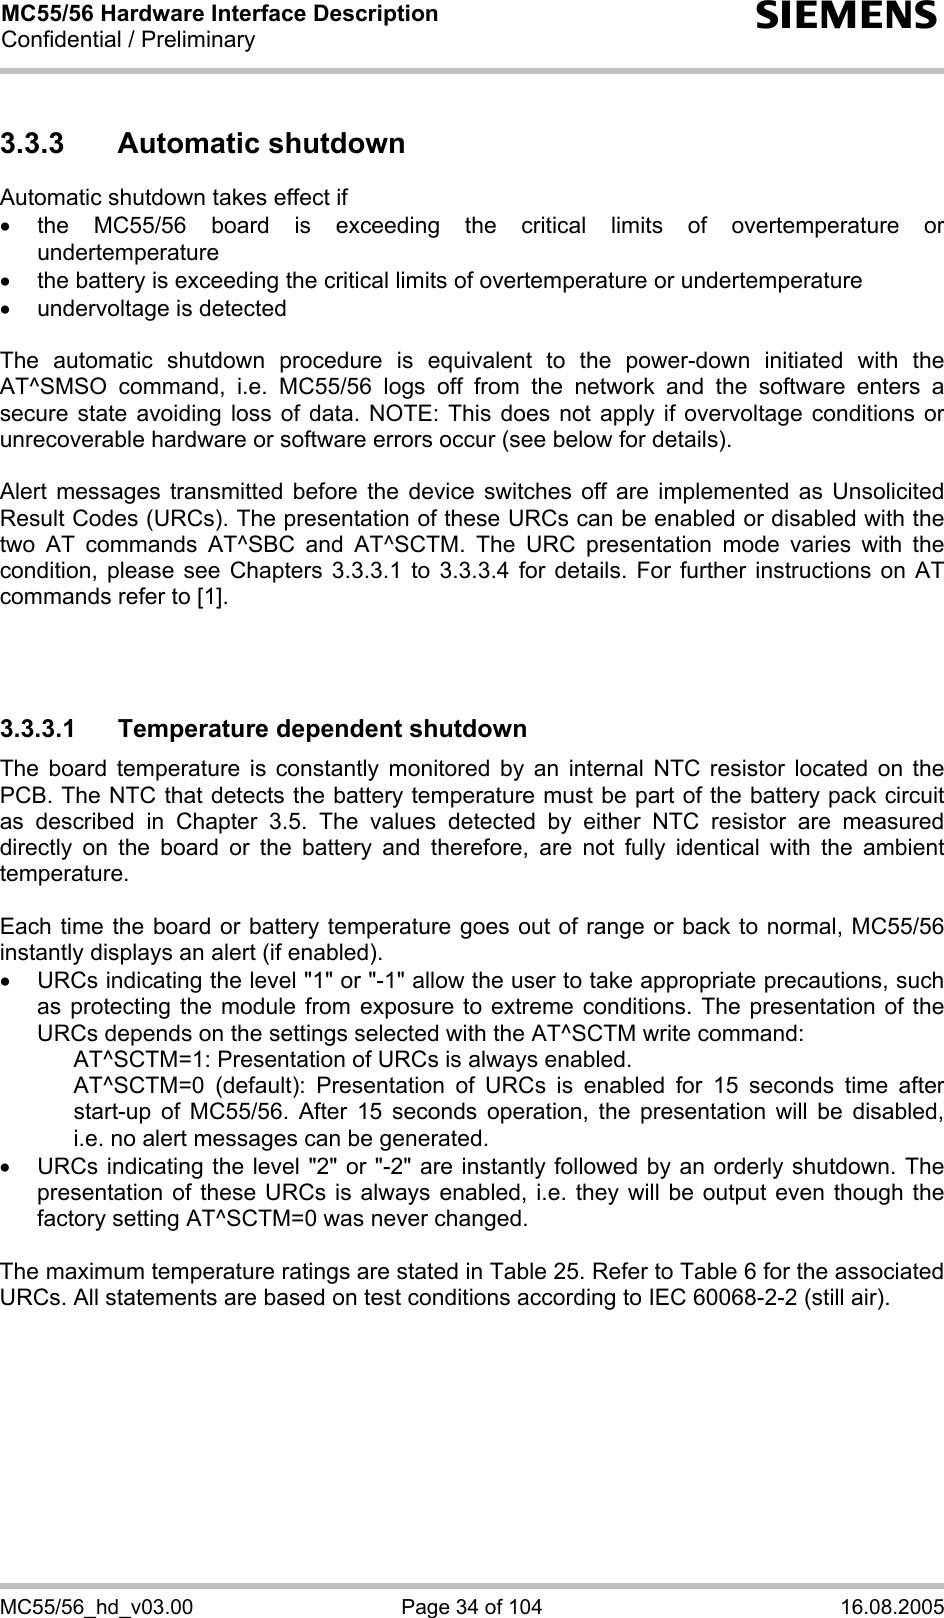 MC55/56 Hardware Interface Description Confidential / Preliminary s MC55/56_hd_v03.00  Page 34 of 104  16.08.2005 3.3.3 Automatic shutdown Automatic shutdown takes effect if • the MC55/56 board is exceeding the critical limits of overtemperature or undertemperature •  the battery is exceeding the critical limits of overtemperature or undertemperature •  undervoltage is detected  The automatic shutdown procedure is equivalent to the power-down initiated with the AT^SMSO command, i.e. MC55/56 logs off from the network and the software enters a secure state avoiding loss of data. NOTE: This does not apply if overvoltage conditions or unrecoverable hardware or software errors occur (see below for details).  Alert messages transmitted before the device switches off are implemented as Unsolicited Result Codes (URCs). The presentation of these URCs can be enabled or disabled with the two AT commands AT^SBC and AT^SCTM. The URC presentation mode varies with the condition, please see Chapters 3.3.3.1 to 3.3.3.4 for details. For further instructions on AT commands refer to [1].    3.3.3.1  Temperature dependent shutdown The board temperature is constantly monitored by an internal NTC resistor located on the PCB. The NTC that detects the battery temperature must be part of the battery pack circuit as described in Chapter 3.5. The values detected by either NTC resistor are measured directly on the board or the battery and therefore, are not fully identical with the ambient temperature.   Each time the board or battery temperature goes out of range or back to normal, MC55/56 instantly displays an alert (if enabled). •  URCs indicating the level &quot;1&quot; or &quot;-1&quot; allow the user to take appropriate precautions, such as protecting the module from exposure to extreme conditions. The presentation of the URCs depends on the settings selected with the AT^SCTM write command:     AT^SCTM=1: Presentation of URCs is always enabled.      AT^SCTM=0 (default): Presentation of URCs is enabled for 15 seconds time after start-up of MC55/56. After 15 seconds operation, the presentation will be disabled, i.e. no alert messages can be generated.  •  URCs indicating the level &quot;2&quot; or &quot;-2&quot; are instantly followed by an orderly shutdown. The presentation of these URCs is always enabled, i.e. they will be output even though the factory setting AT^SCTM=0 was never changed.  The maximum temperature ratings are stated in Table 25. Refer to Table 6 for the associated URCs. All statements are based on test conditions according to IEC 60068-2-2 (still air).  